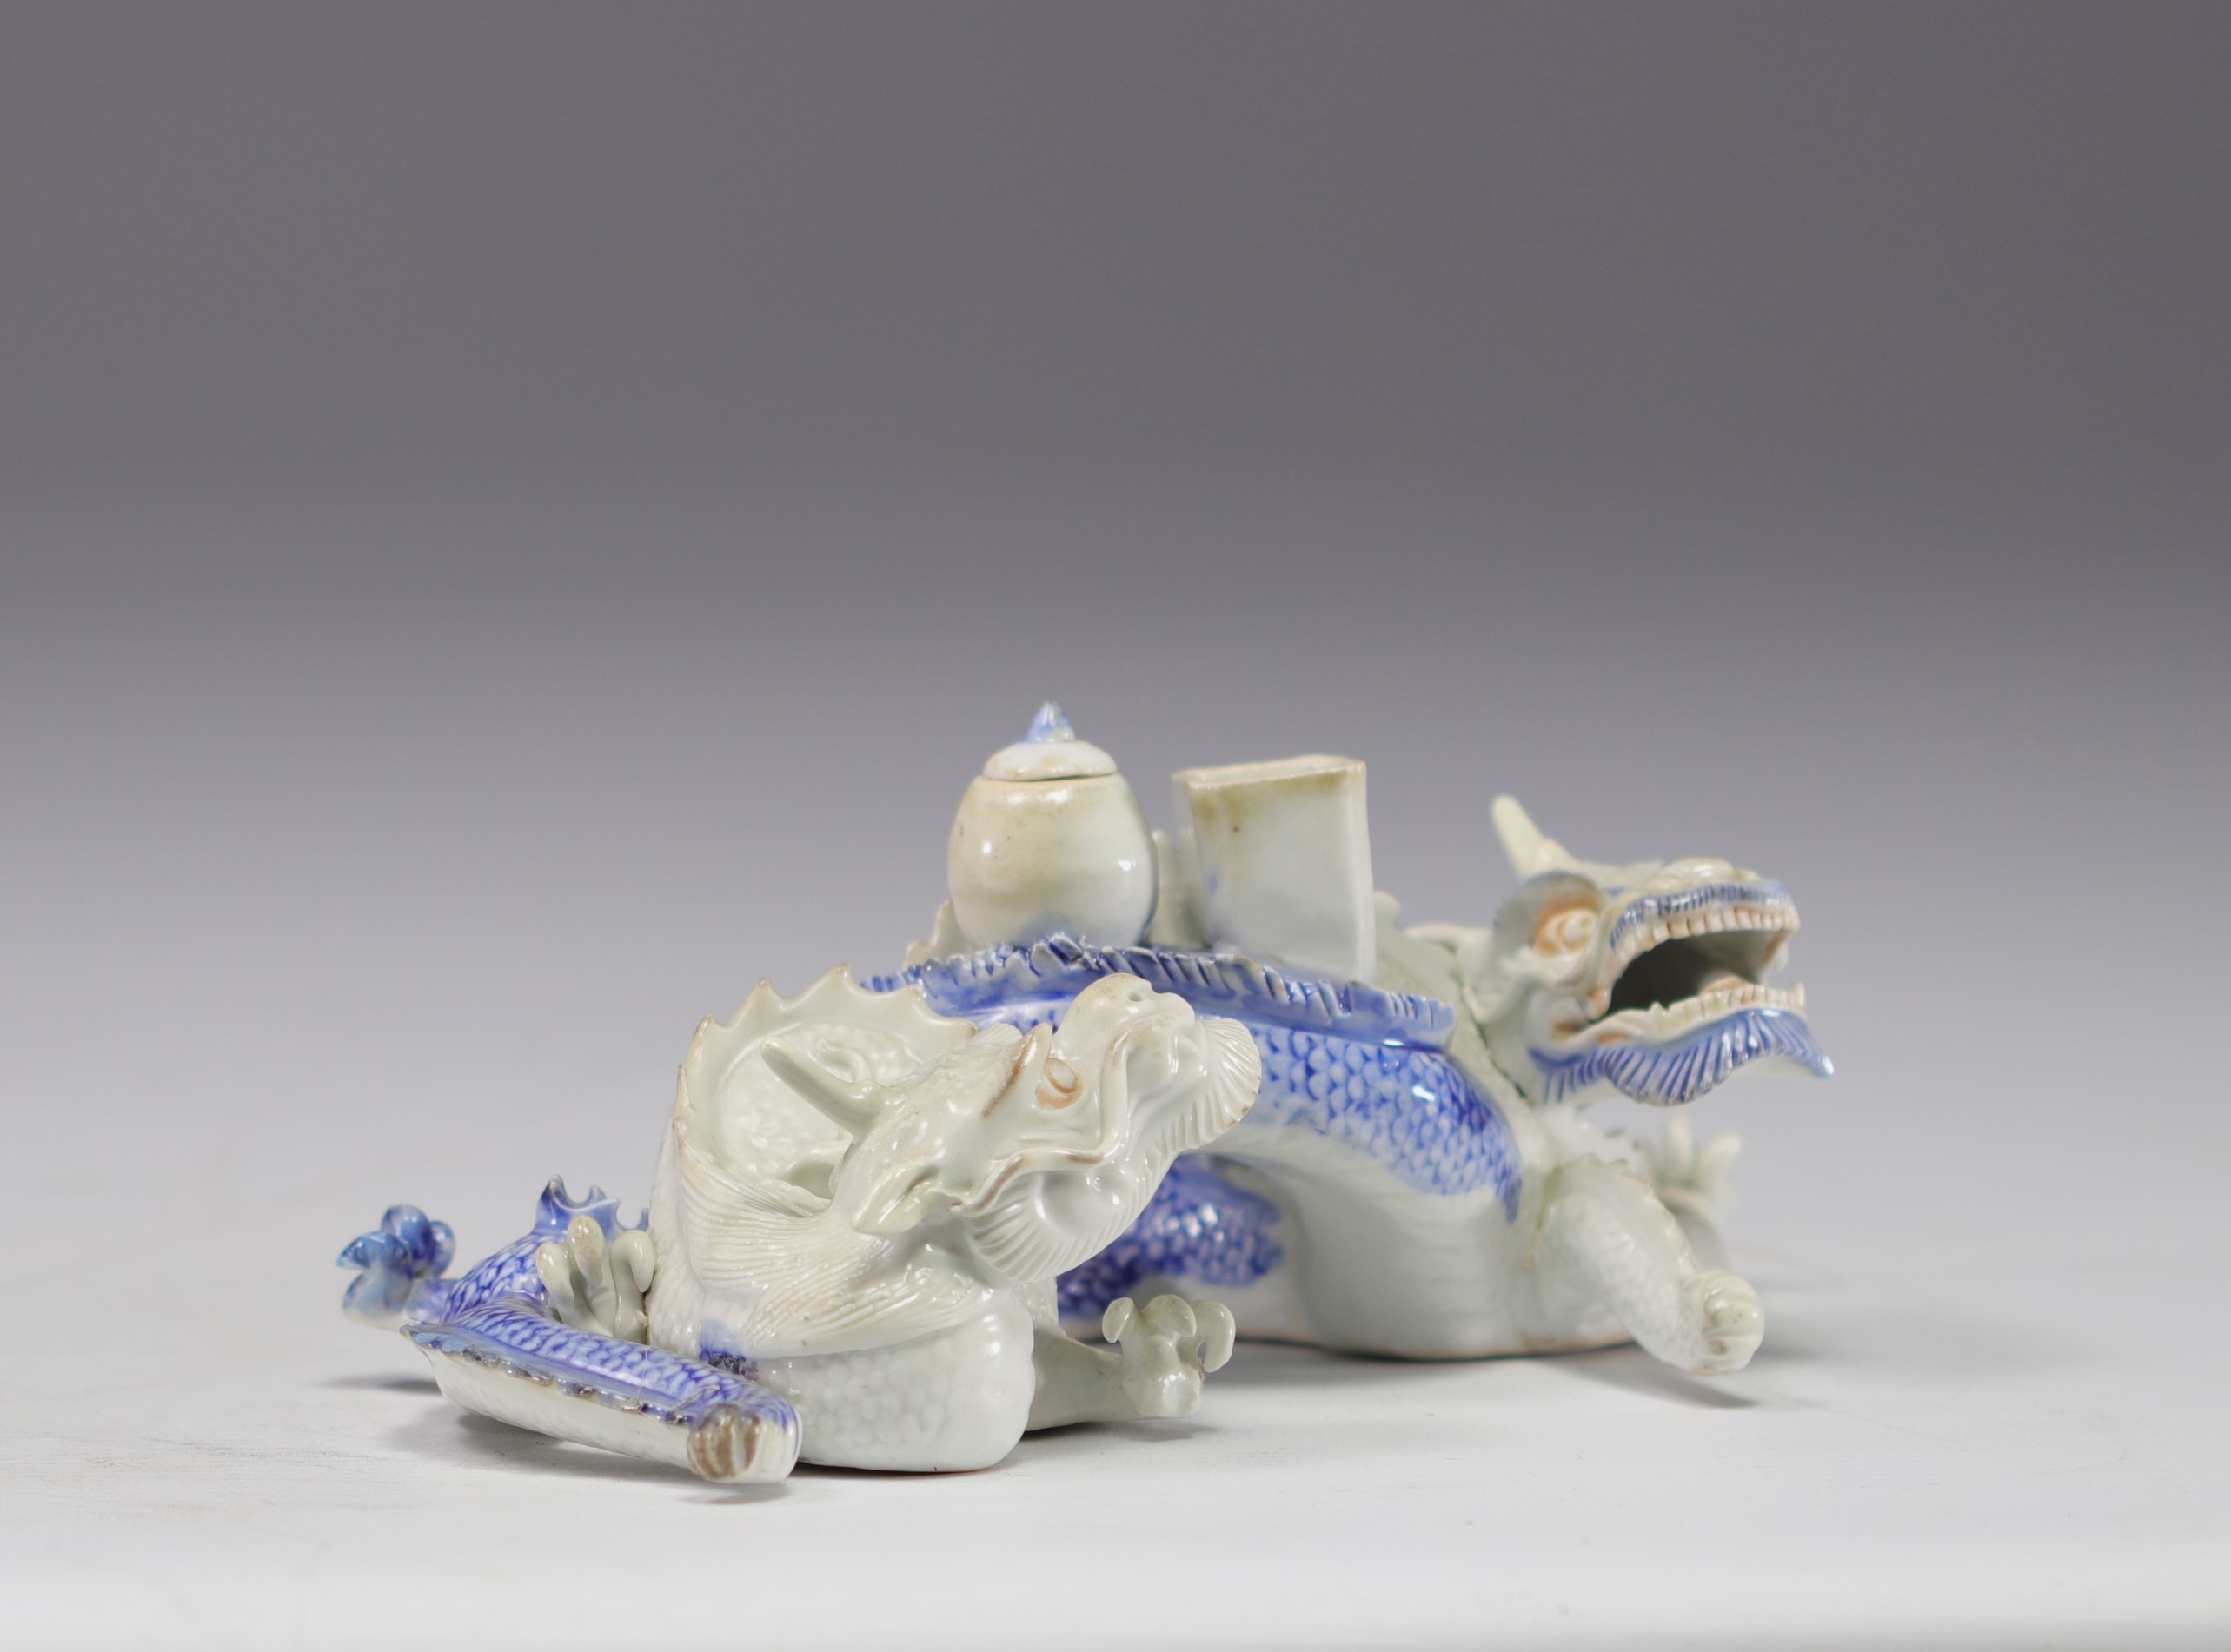 Japanese porcelain inkwell decorated with dragons - Image 2 of 4